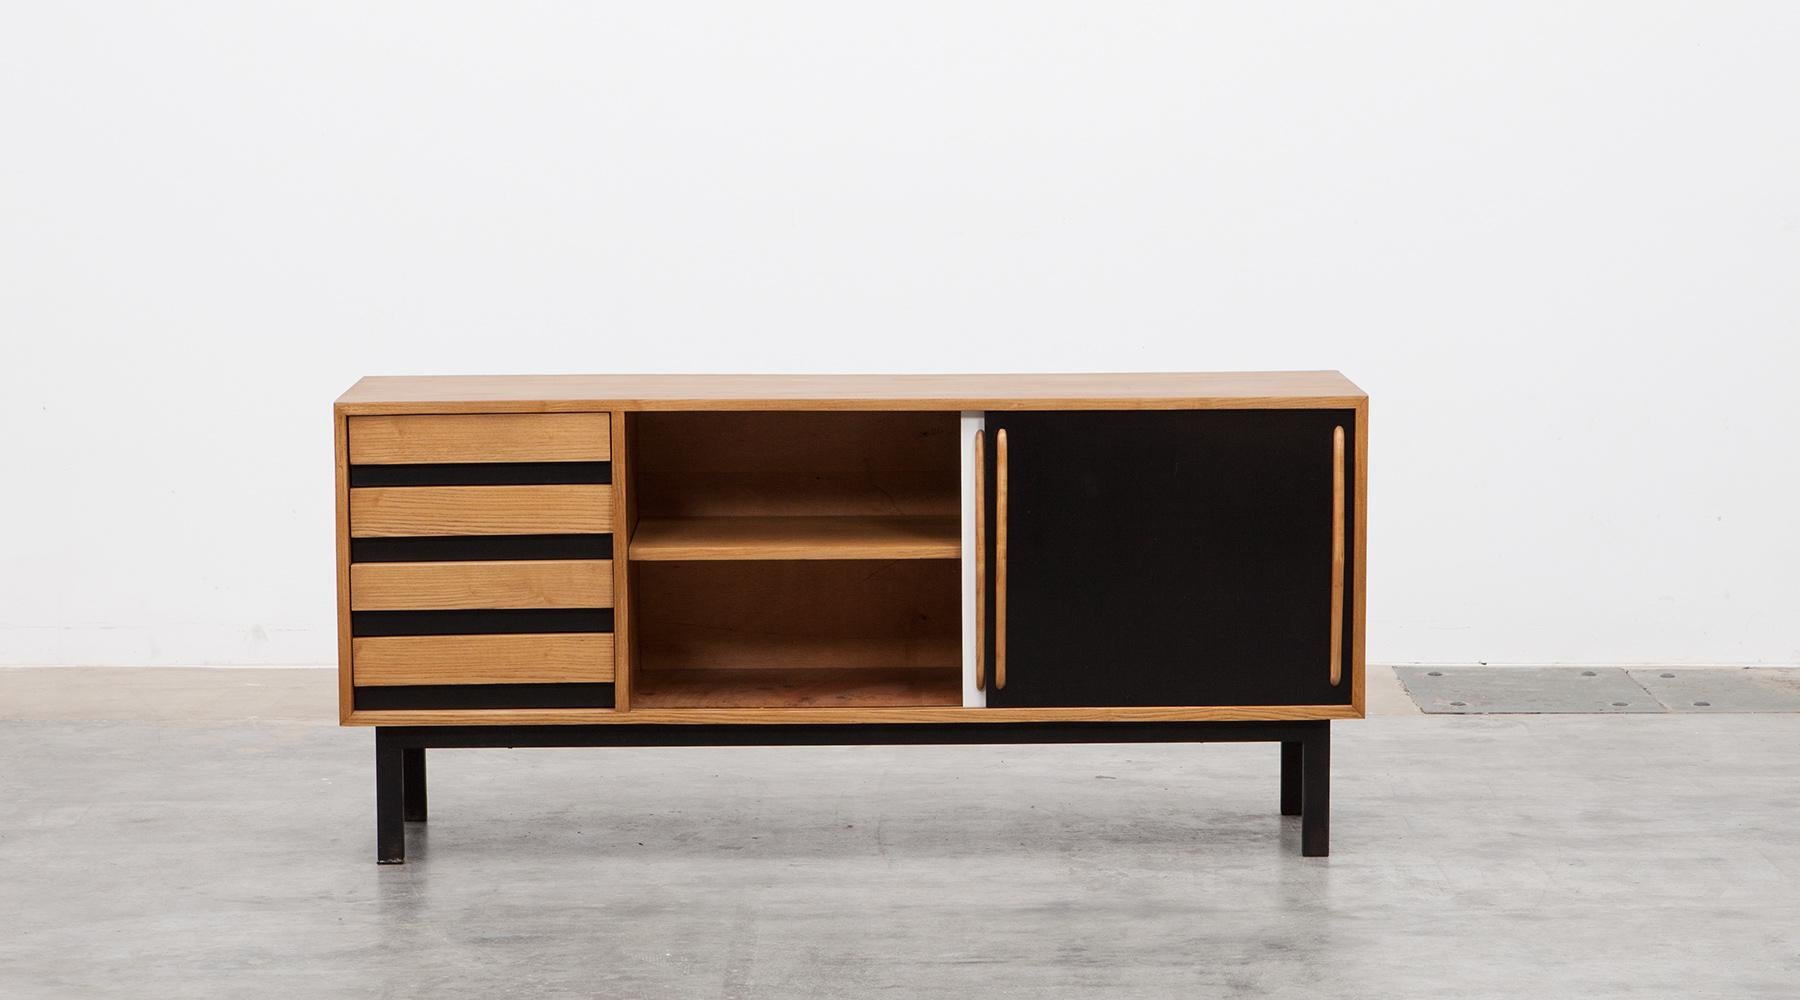 Sideboard in ash and laminate by Charlotte Perriand, France, 1958.

Beautiful and really rare Charlotte Perriand sideboard edited by Steph Simon. The corpus, drawers and grips are in ash veneer, the sliding doors in black and white are laminate. The